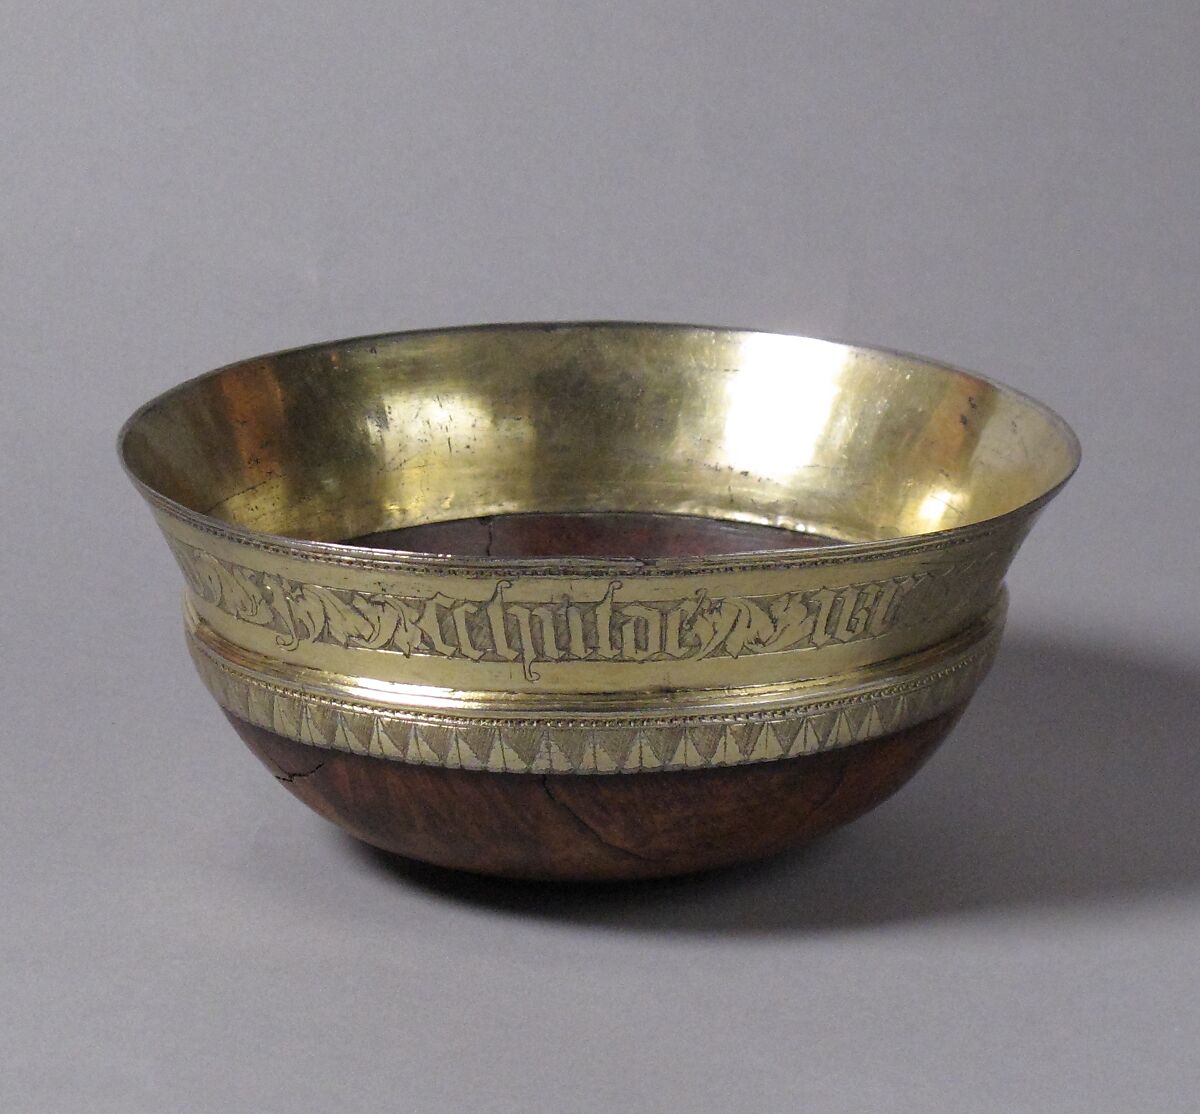 Drinking Bowl, Maple with silver-gilt mounts, British